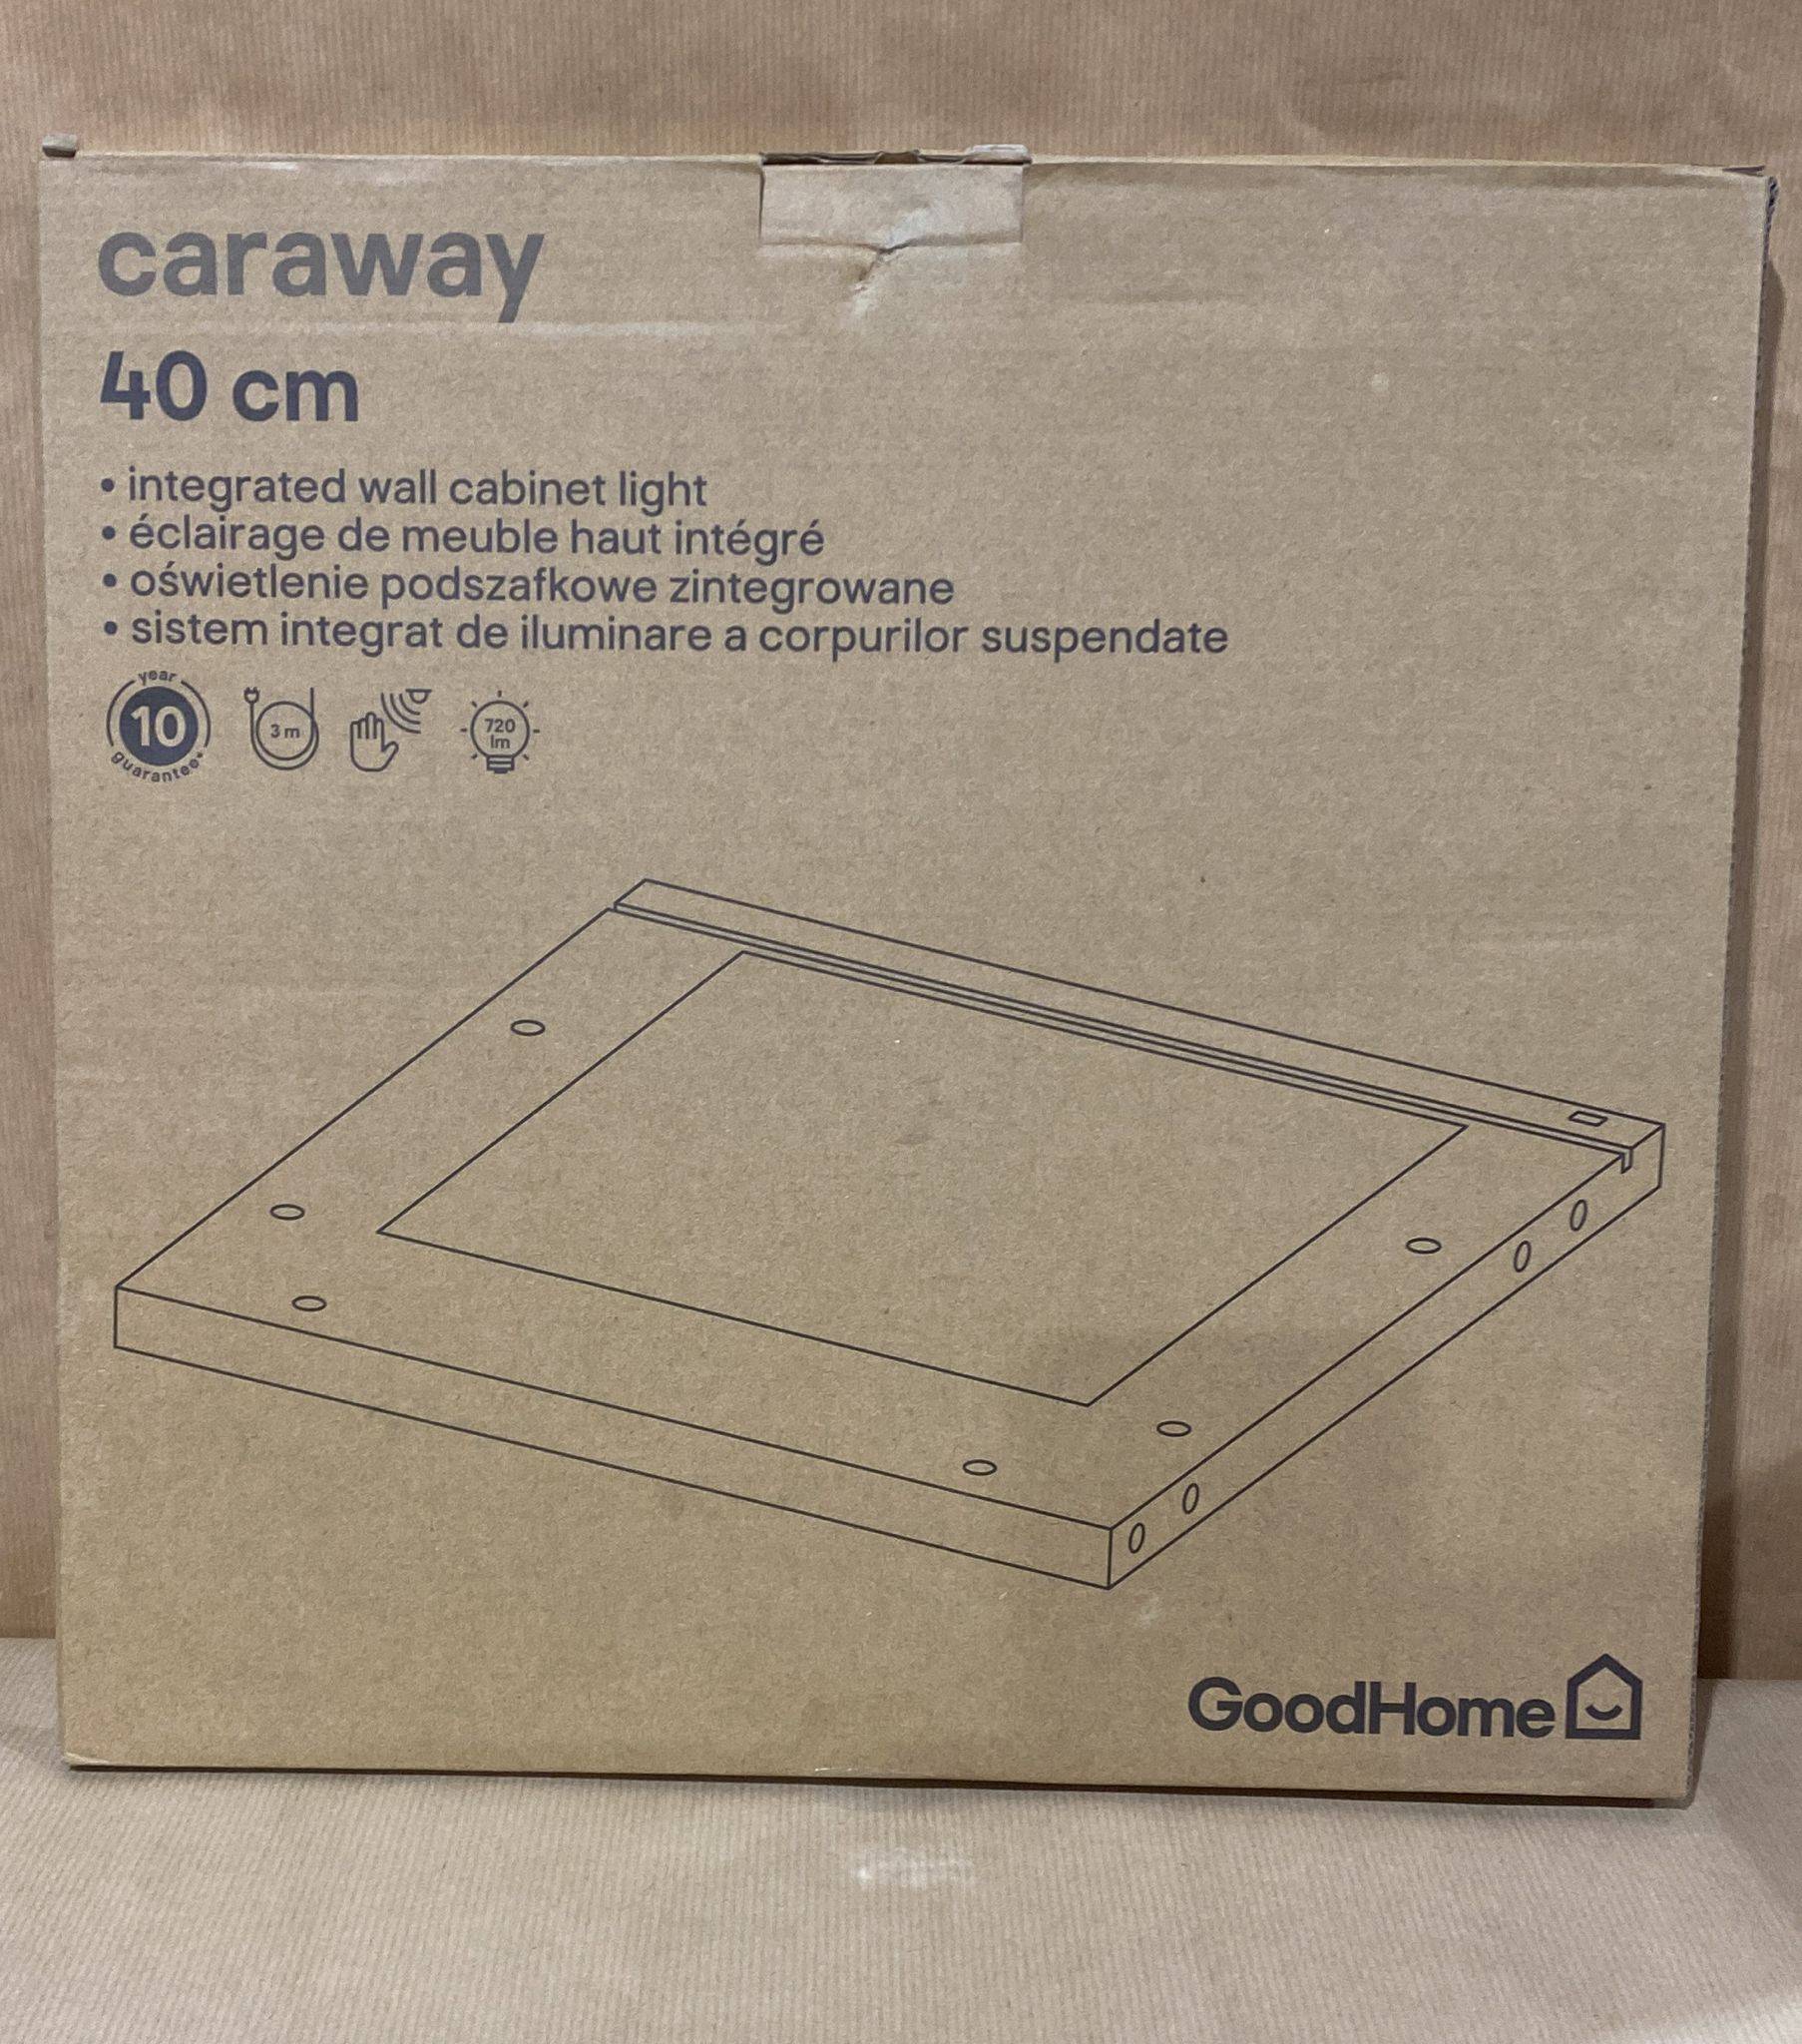 GoodHome Caraway Mains-powered LED Cool white & warm Cabinet light 364mm Without Power lead - 0788